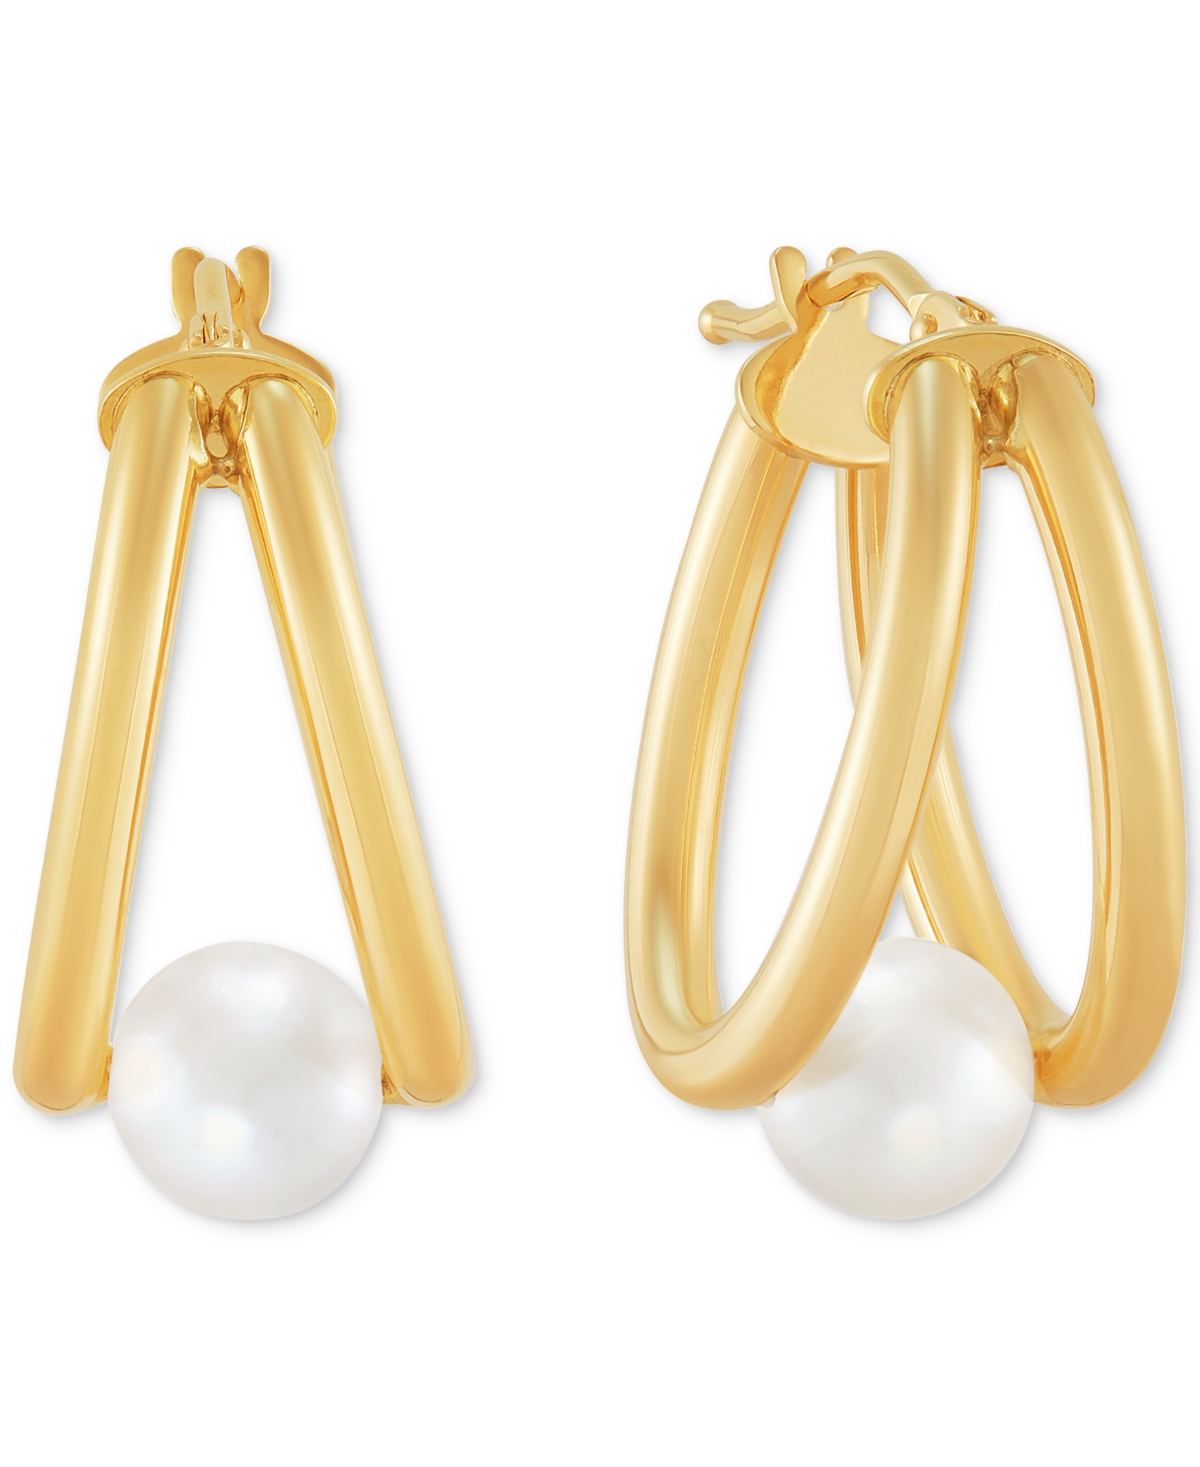 Cultured Freshwater Pearl (6mm) Double Small Hoop Earrings in 14k Gold, 1" - Gold